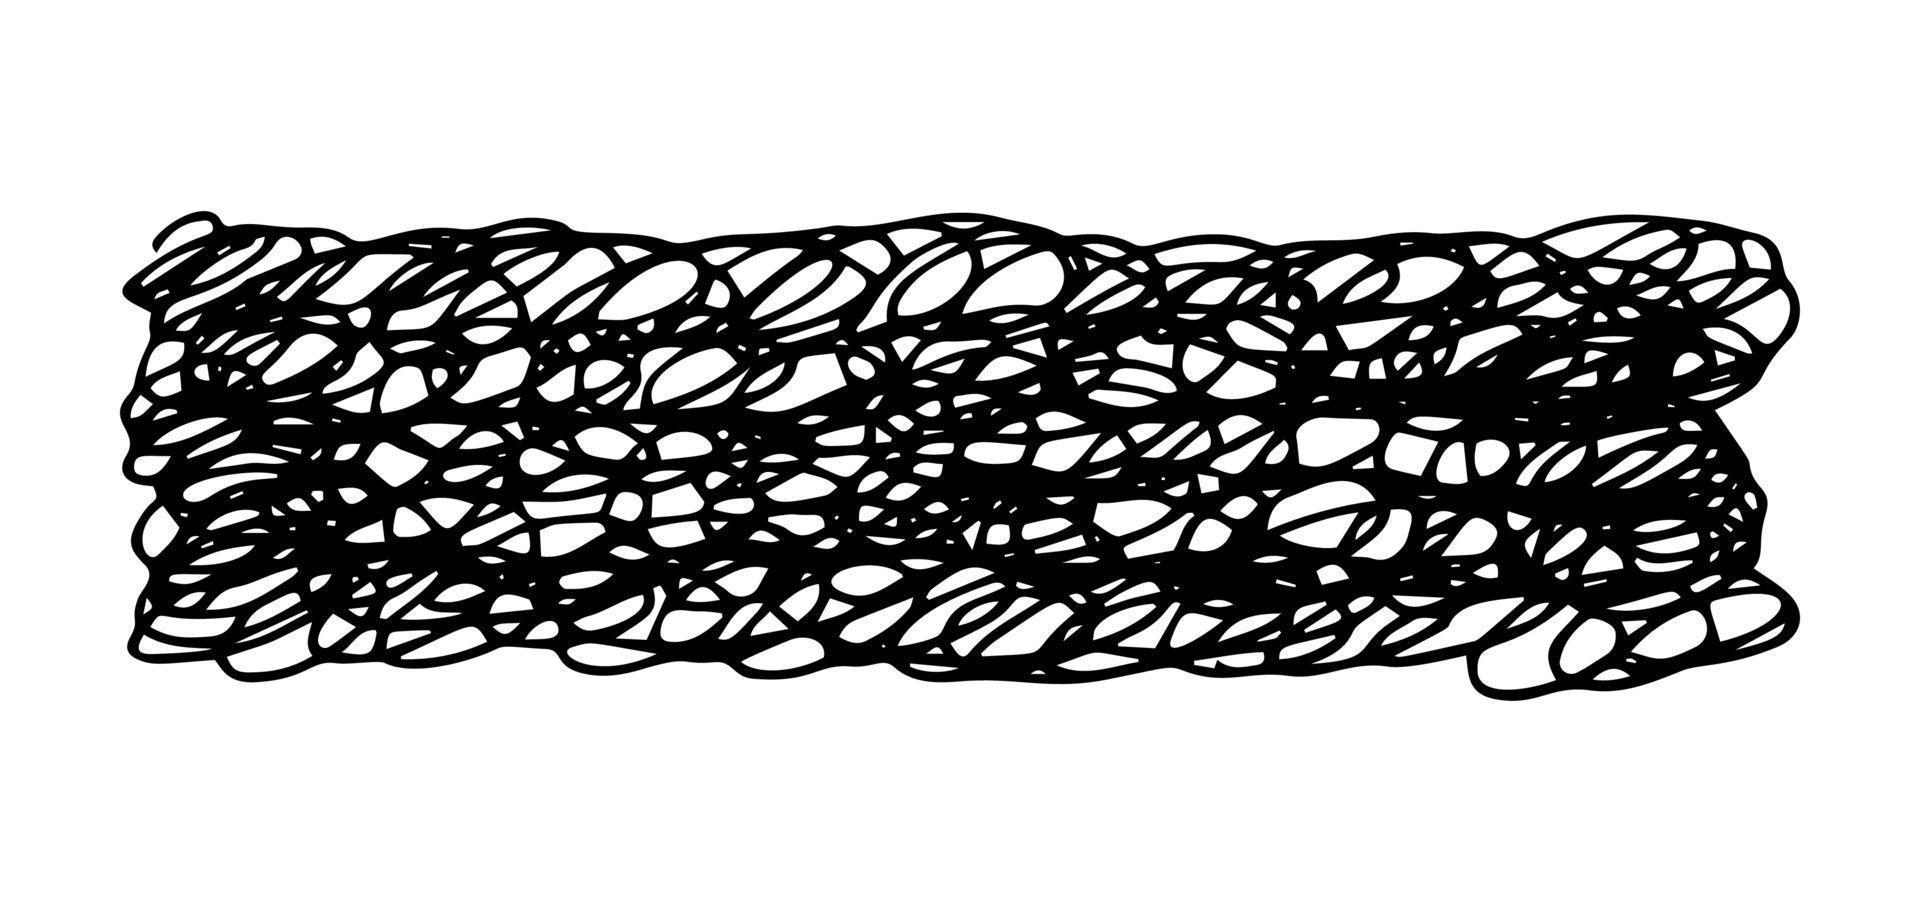 Sketch scribble smear. Black pencil drawing in the shape of a rectangle on white background. Great design for any purposes. Vector illustration.